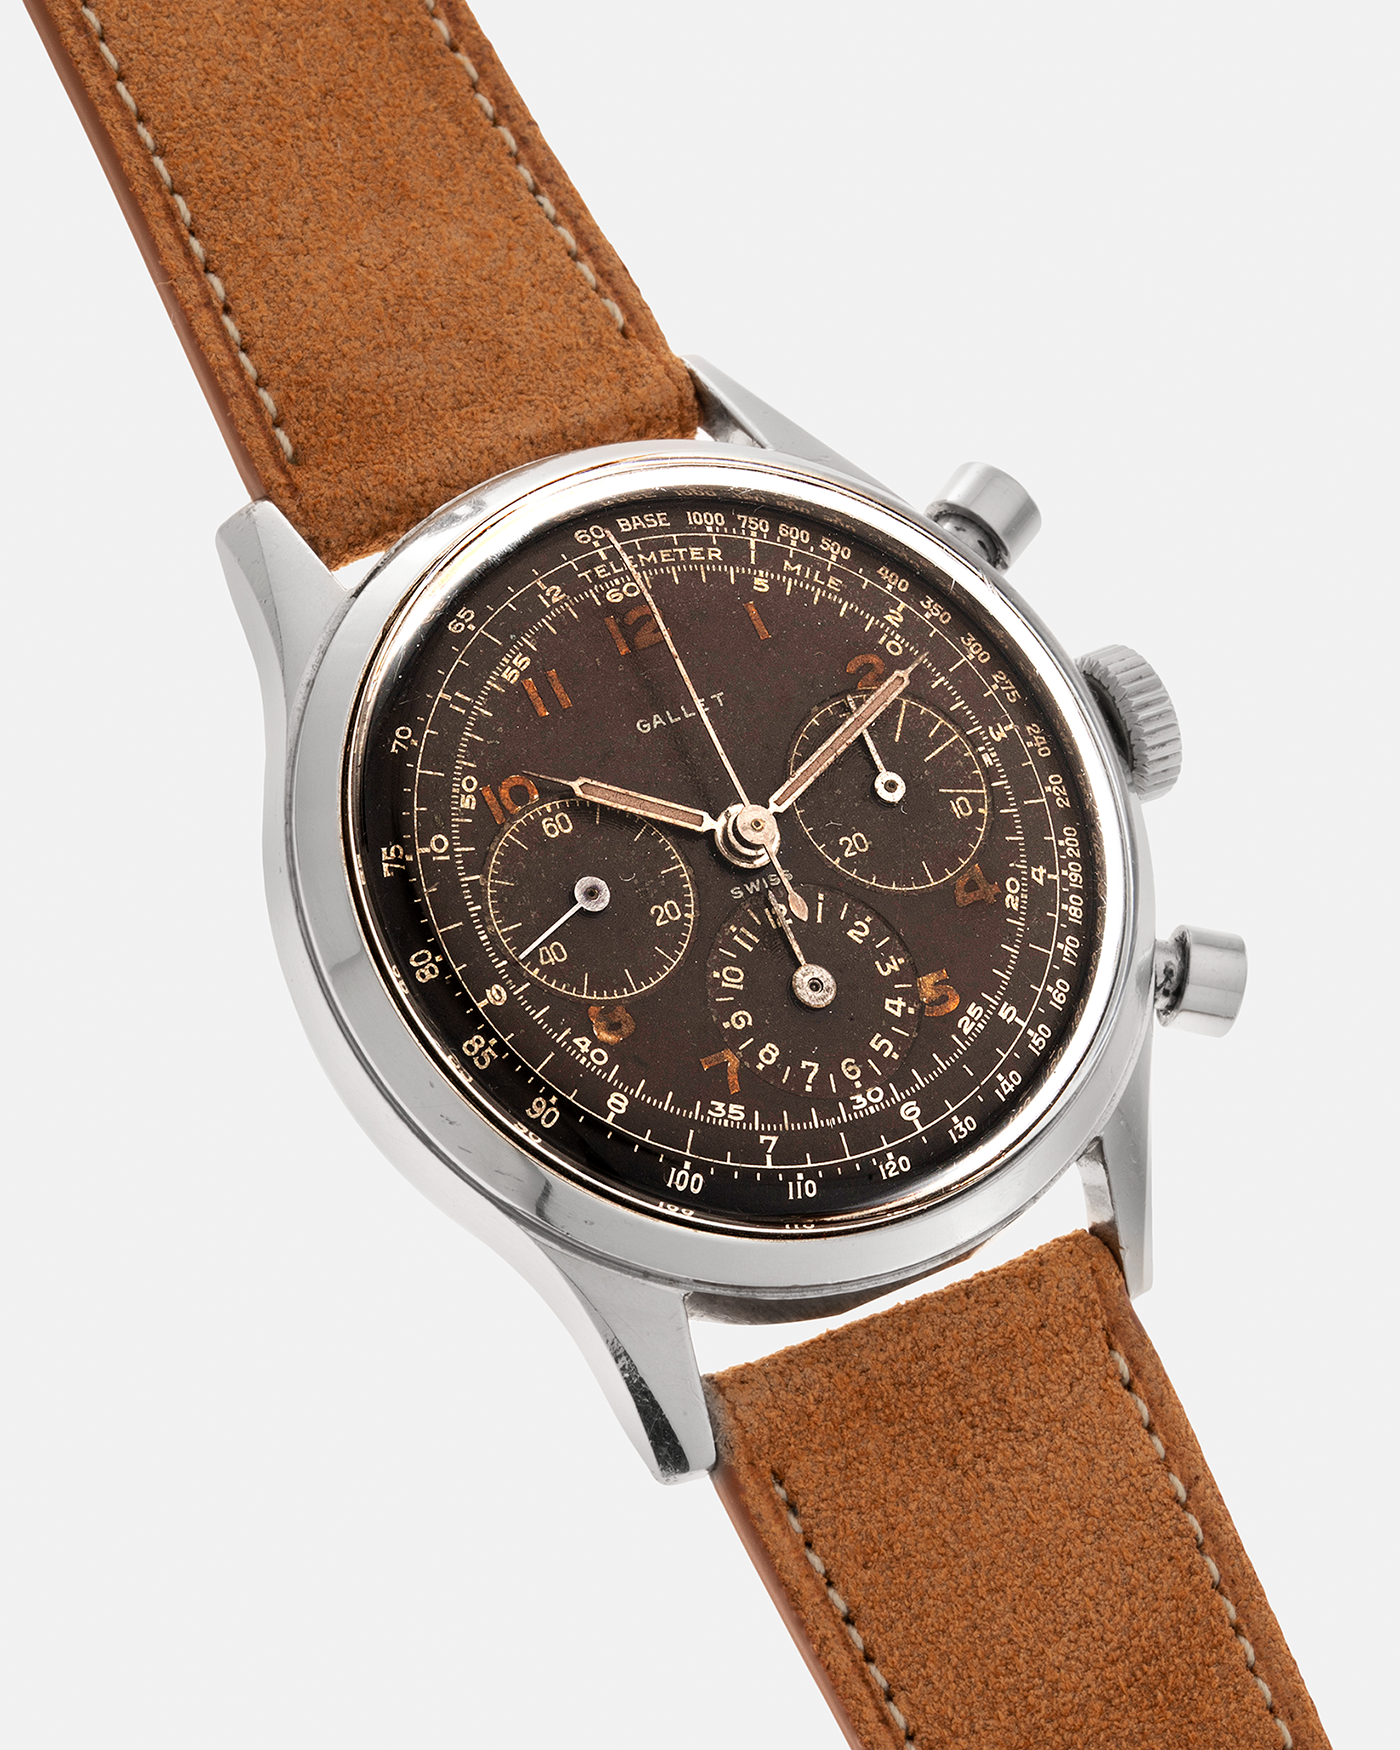 Brand: Gallet Year: 1950’s Model: Mutichron 12H Chronograph Serial Number: 933631 Material: Stainless Steel Movement: Excelsior Park 40, Manual-Winding Case Diameter: 37mm Strap: Nostime Sand Tan Suede Calf Leather Strap